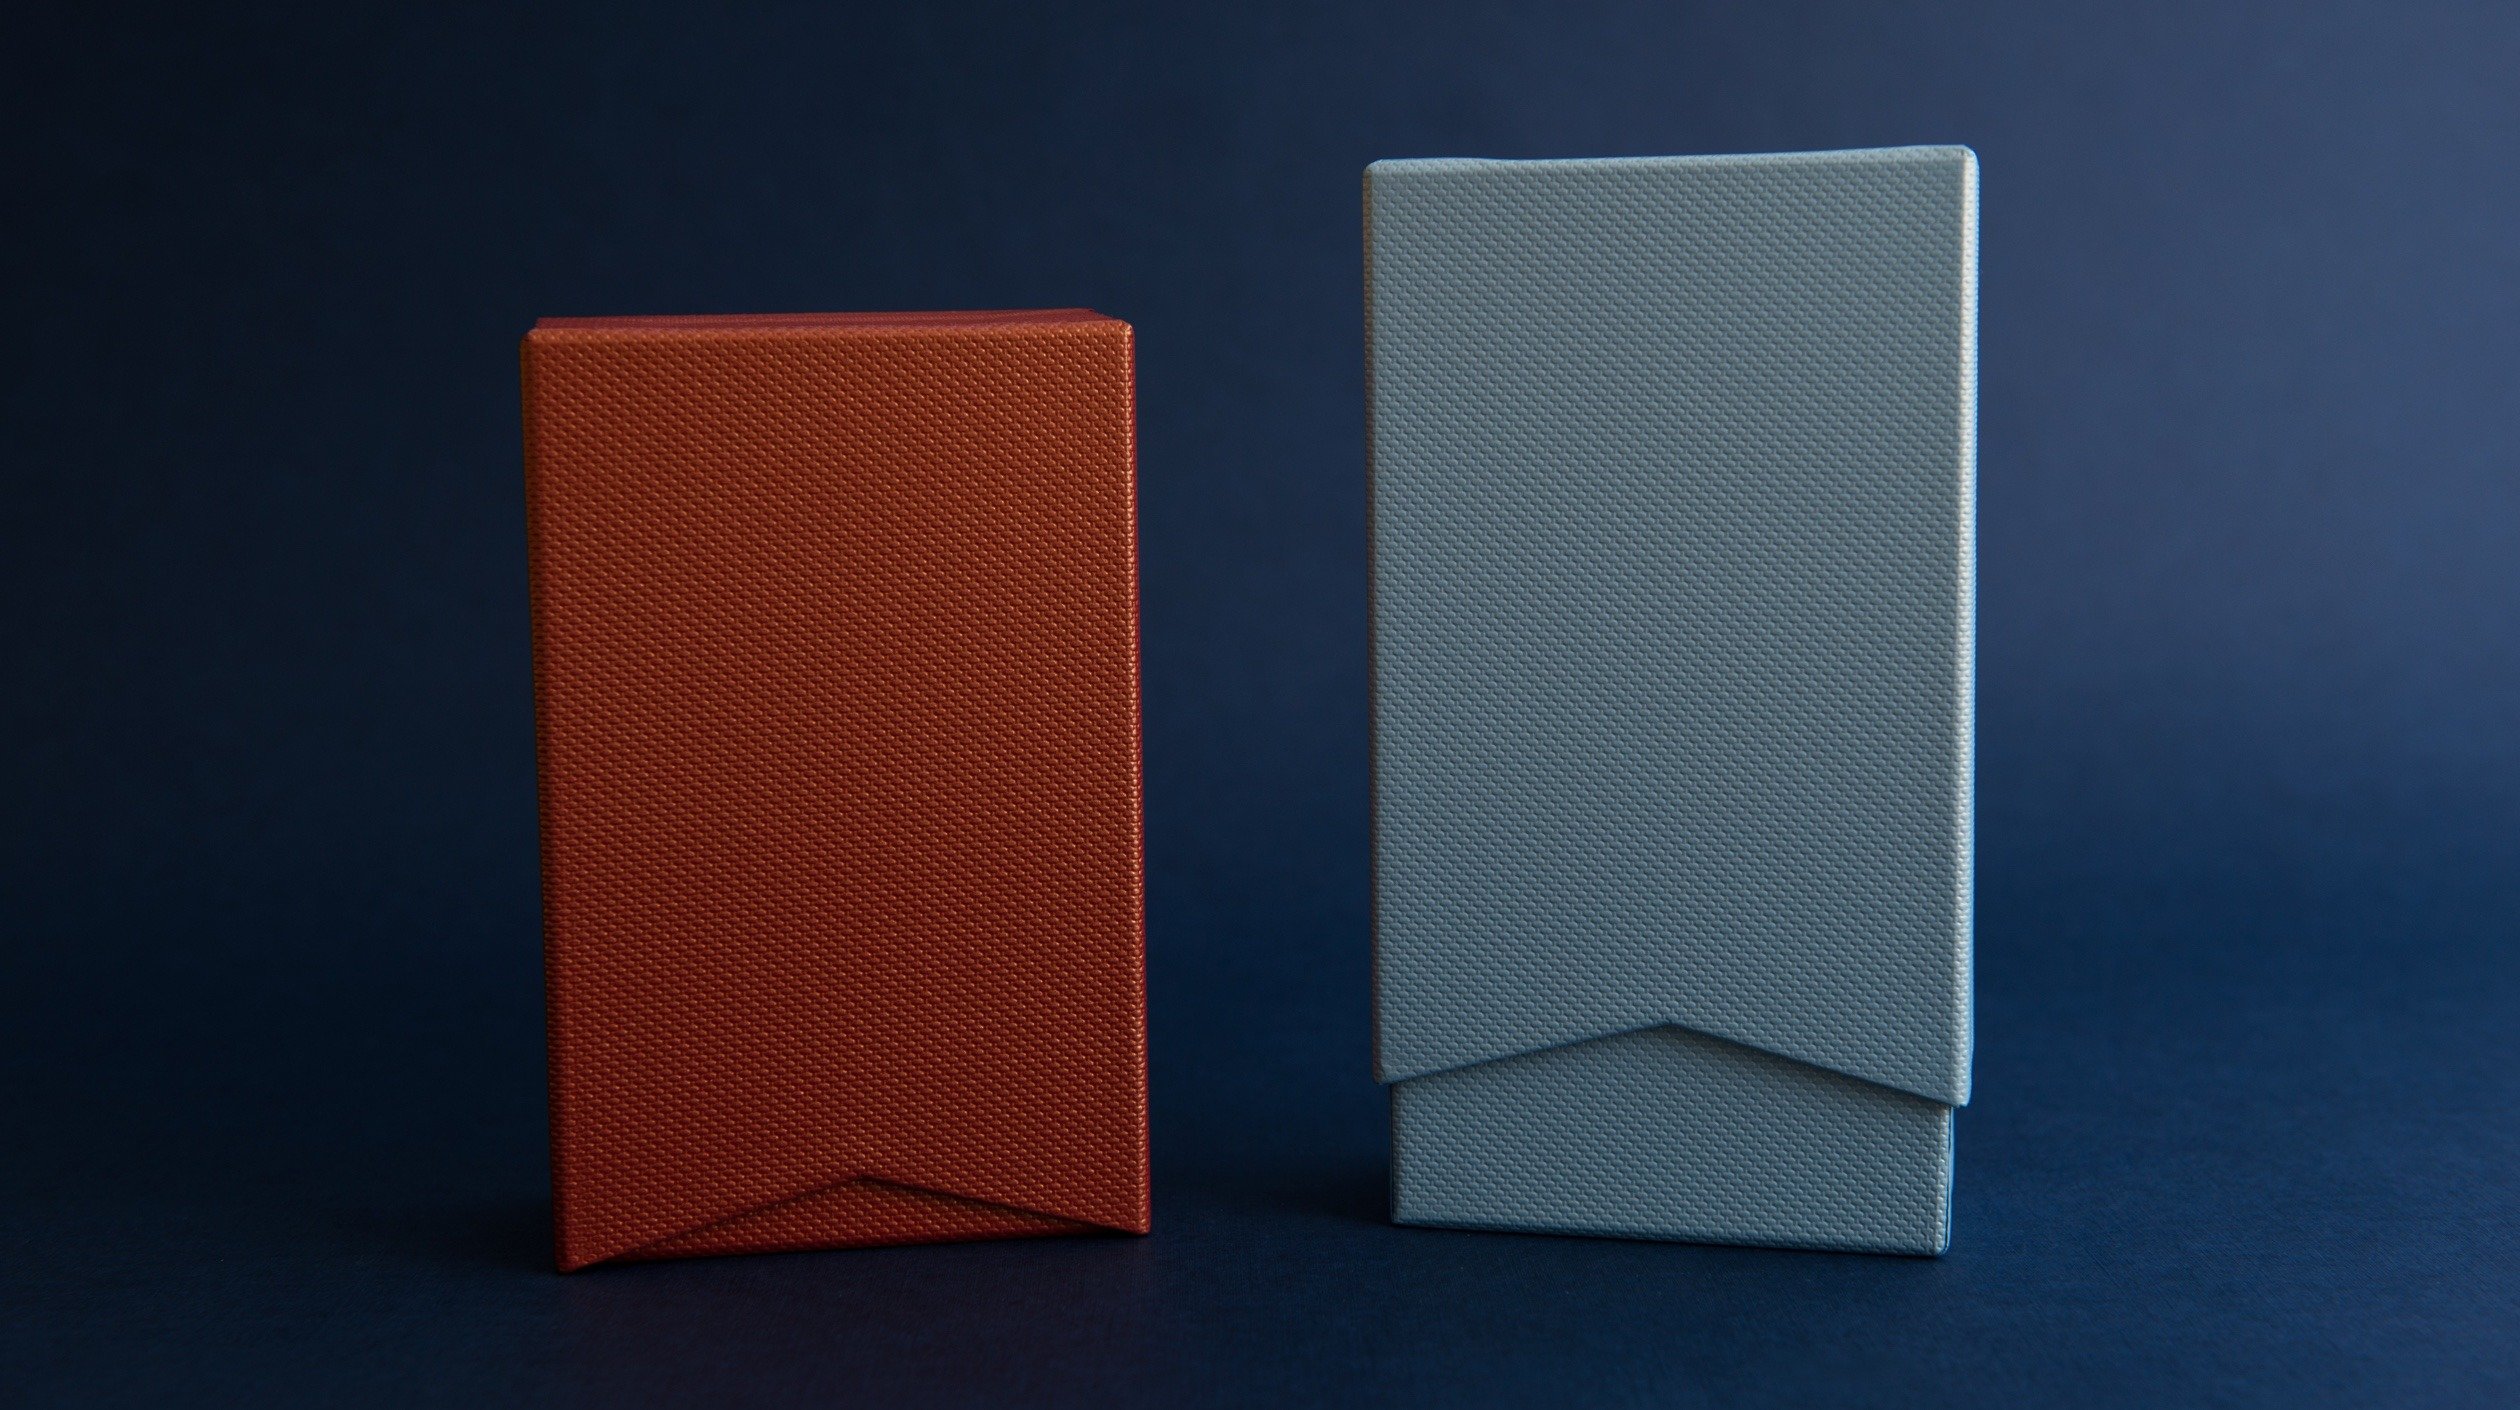 complex custom boxes side-by-side